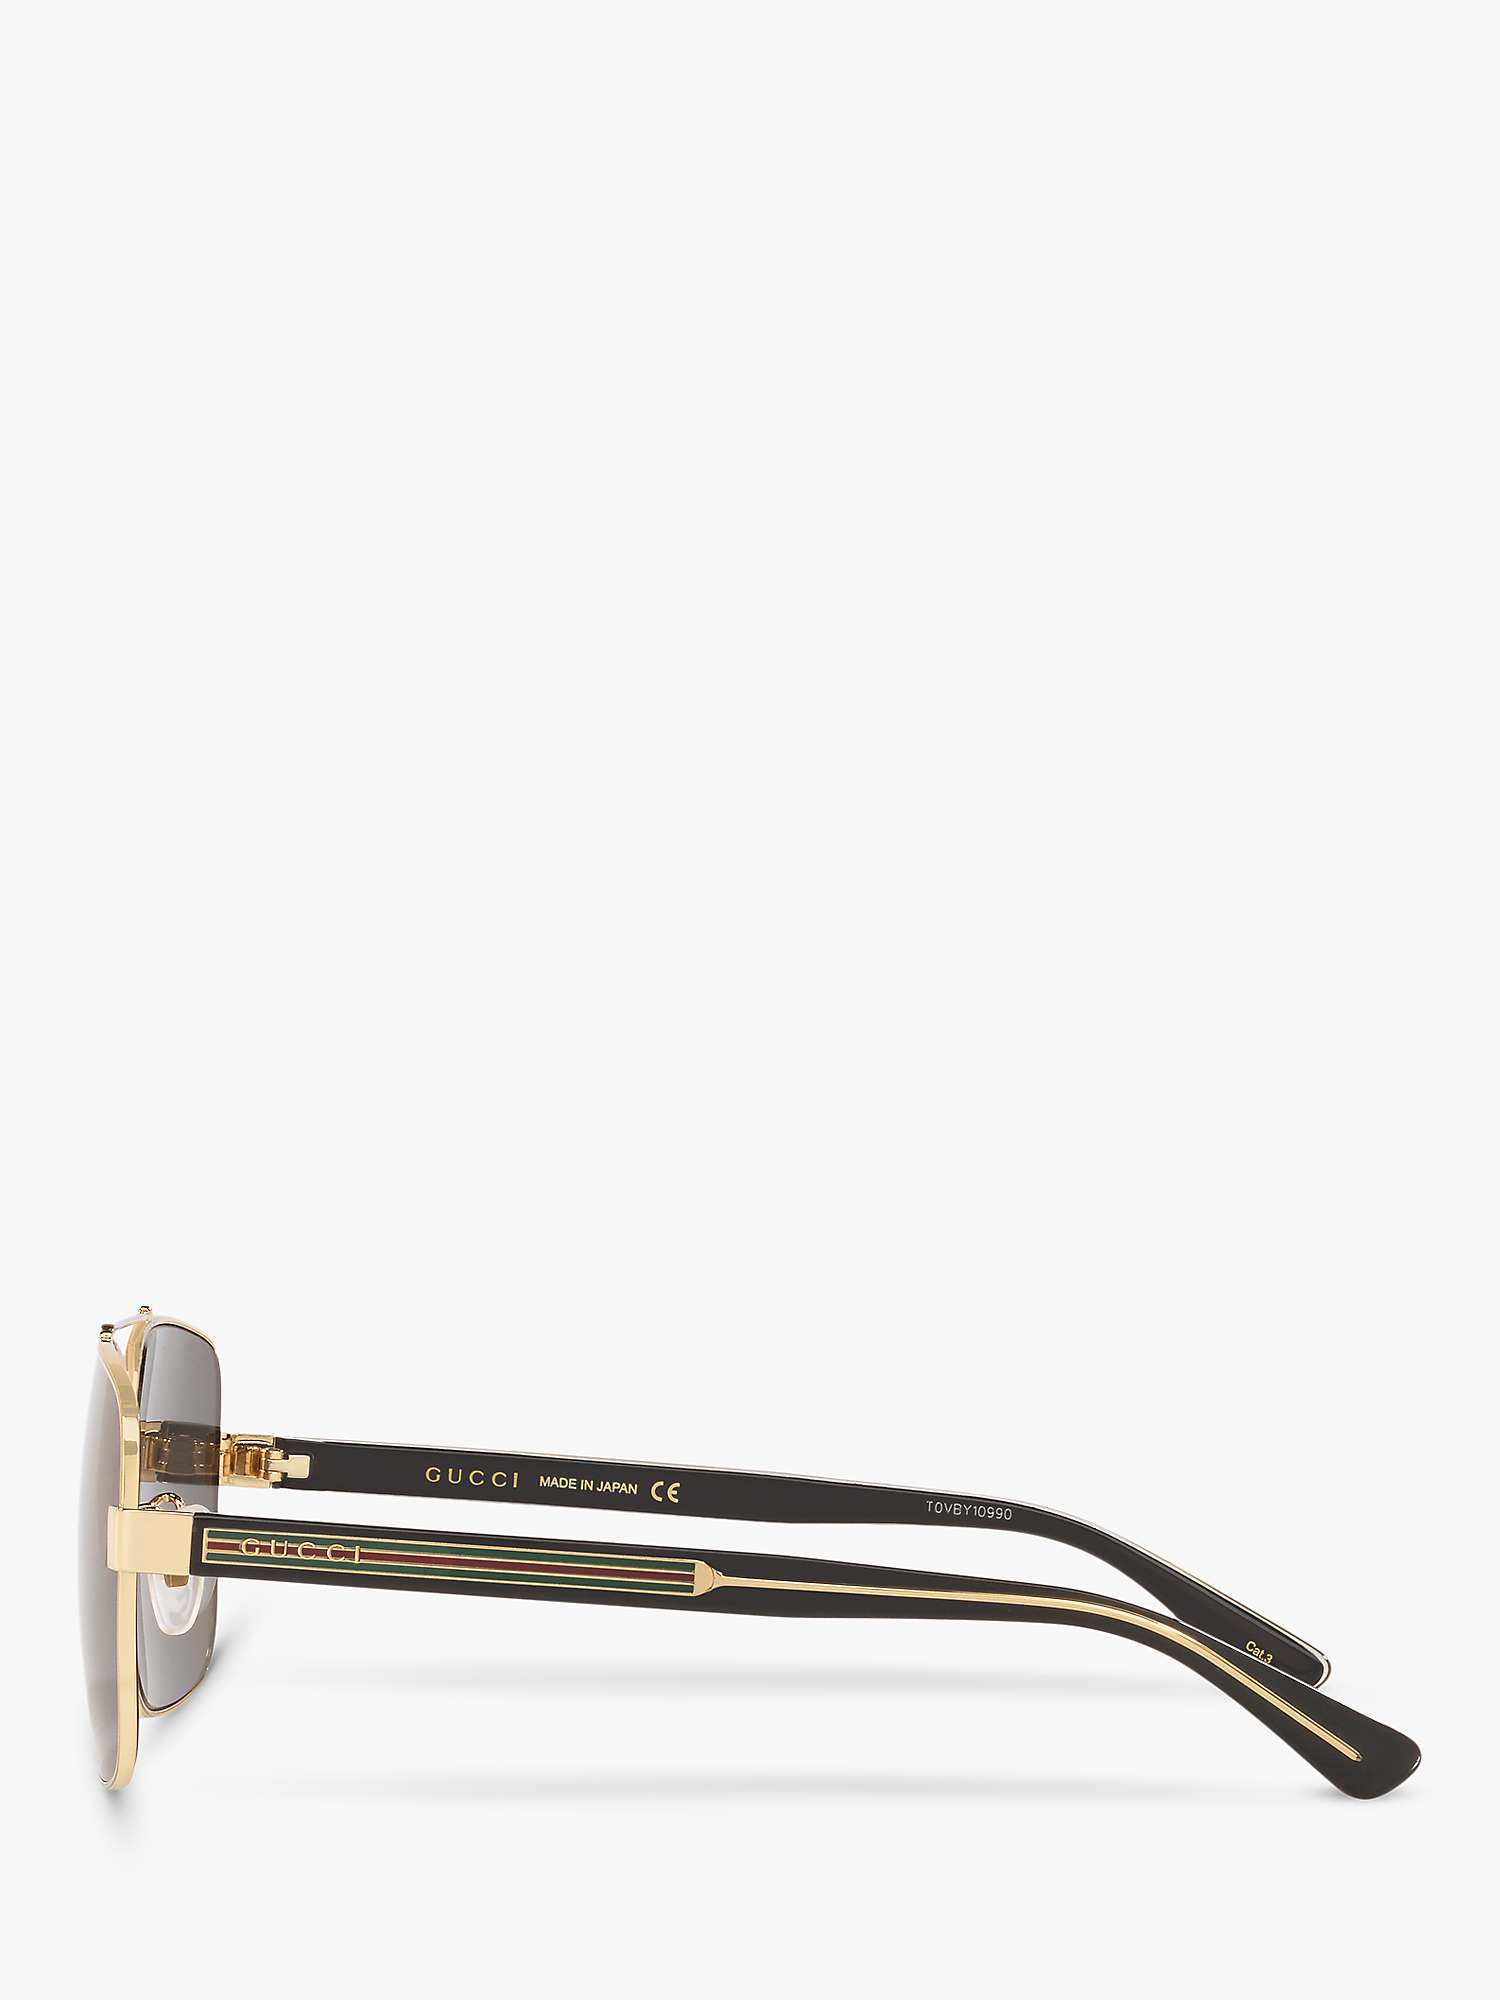 Gucci GG0529S Men's Square Sunglasses, Gold/Grey at John Lewis & Partners